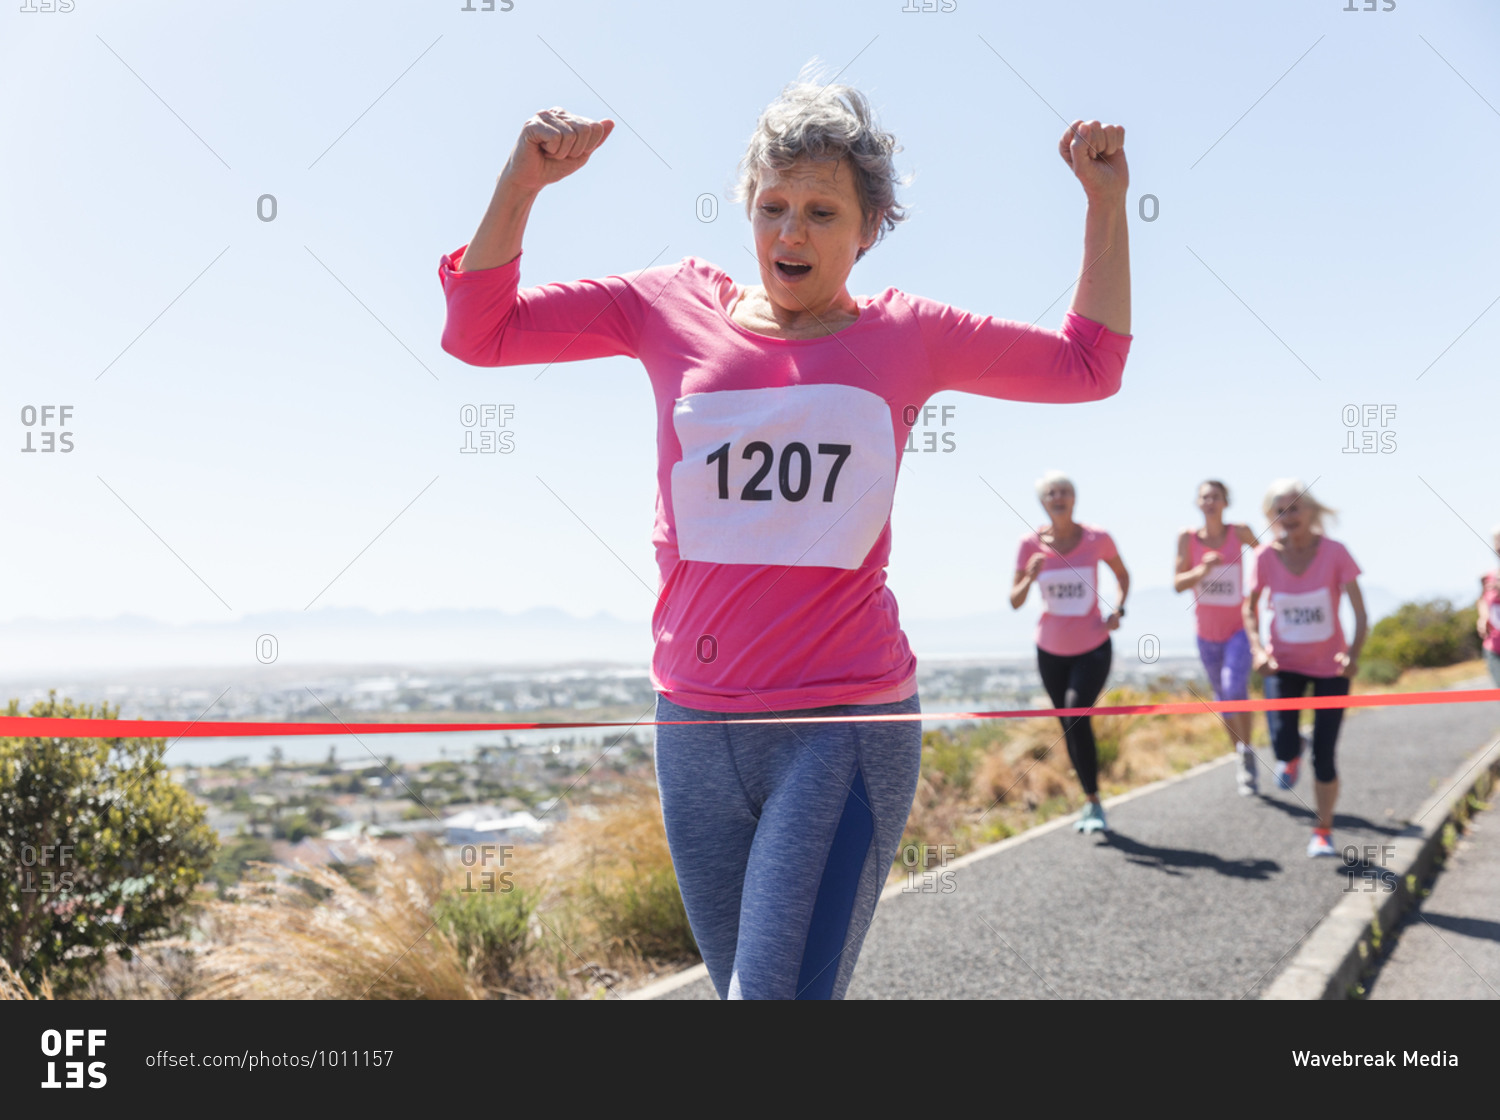 Group of Caucasian female friends enjoying exercising on a sunny day, having running race and wearing numbers, running towards a finish line and celebrating.